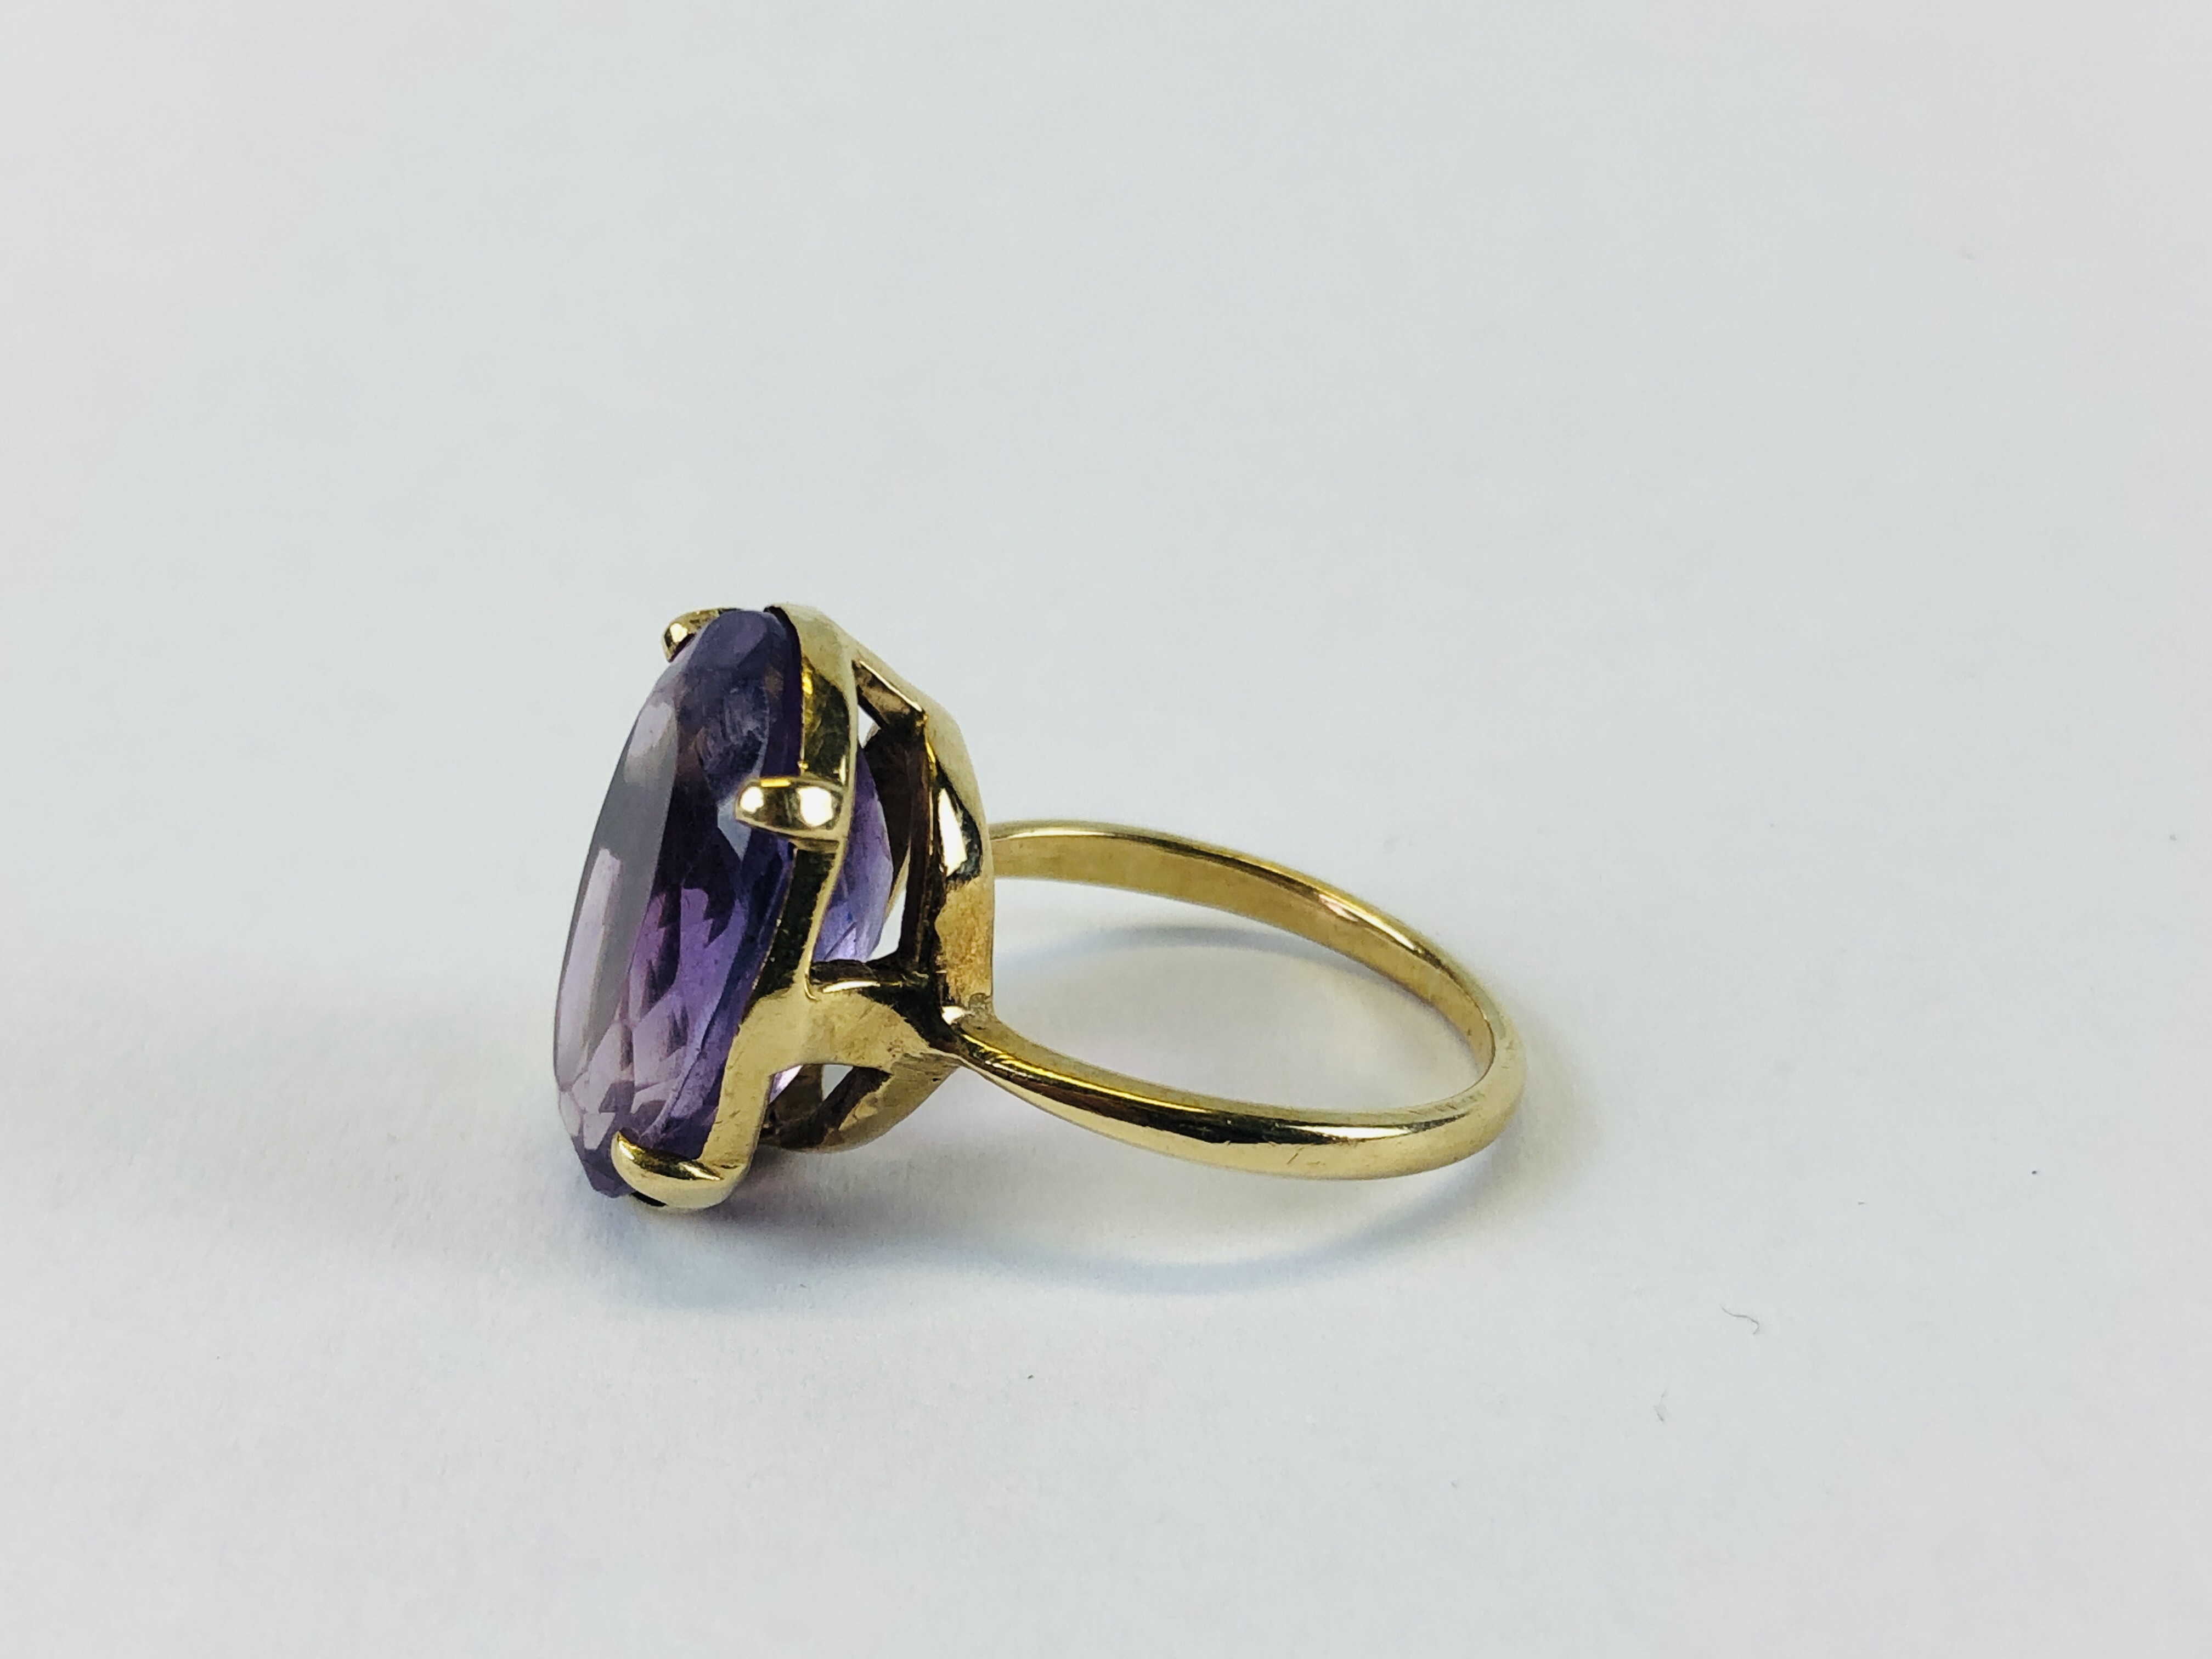 AN IMPRESSIVE 9CT GOLD RING SET WITH AN OVAL AMETHYST - Image 3 of 8